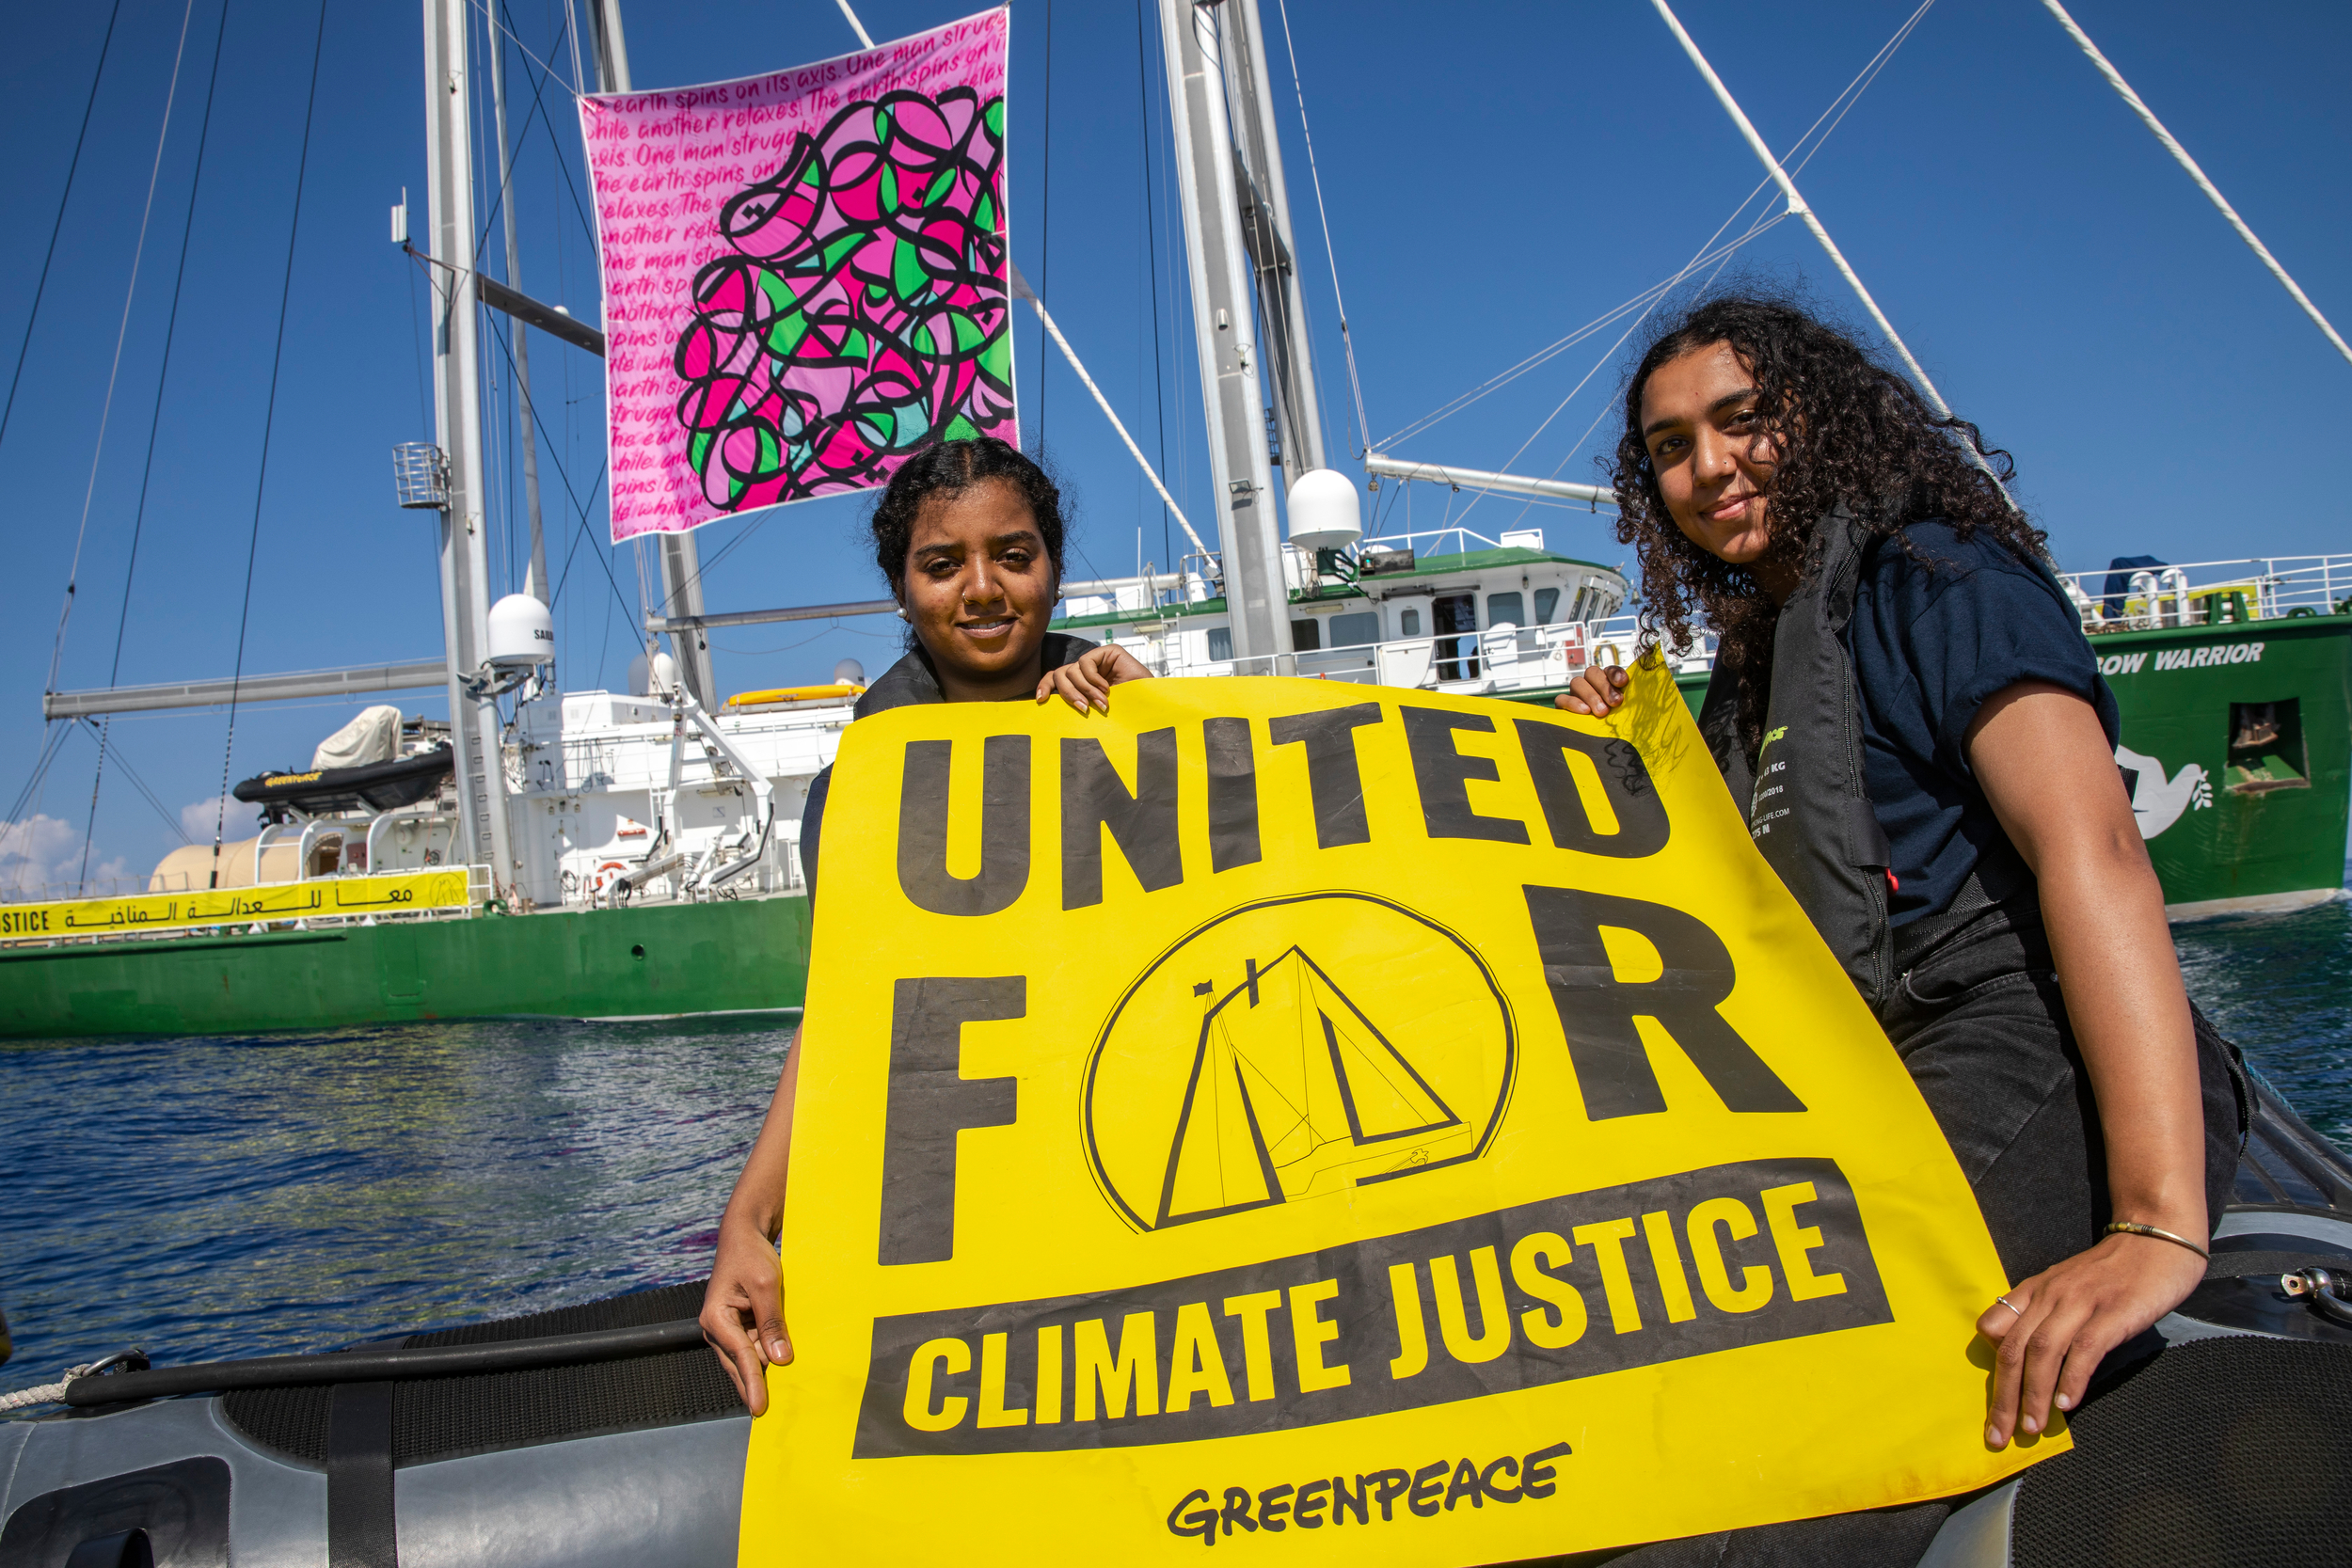 Two young women hold a large yellow Greenpeace banner reading 'United for Climate Justice'. In the background a green and white ship is visible which has a colourful pink and green banner hanging on its sails.